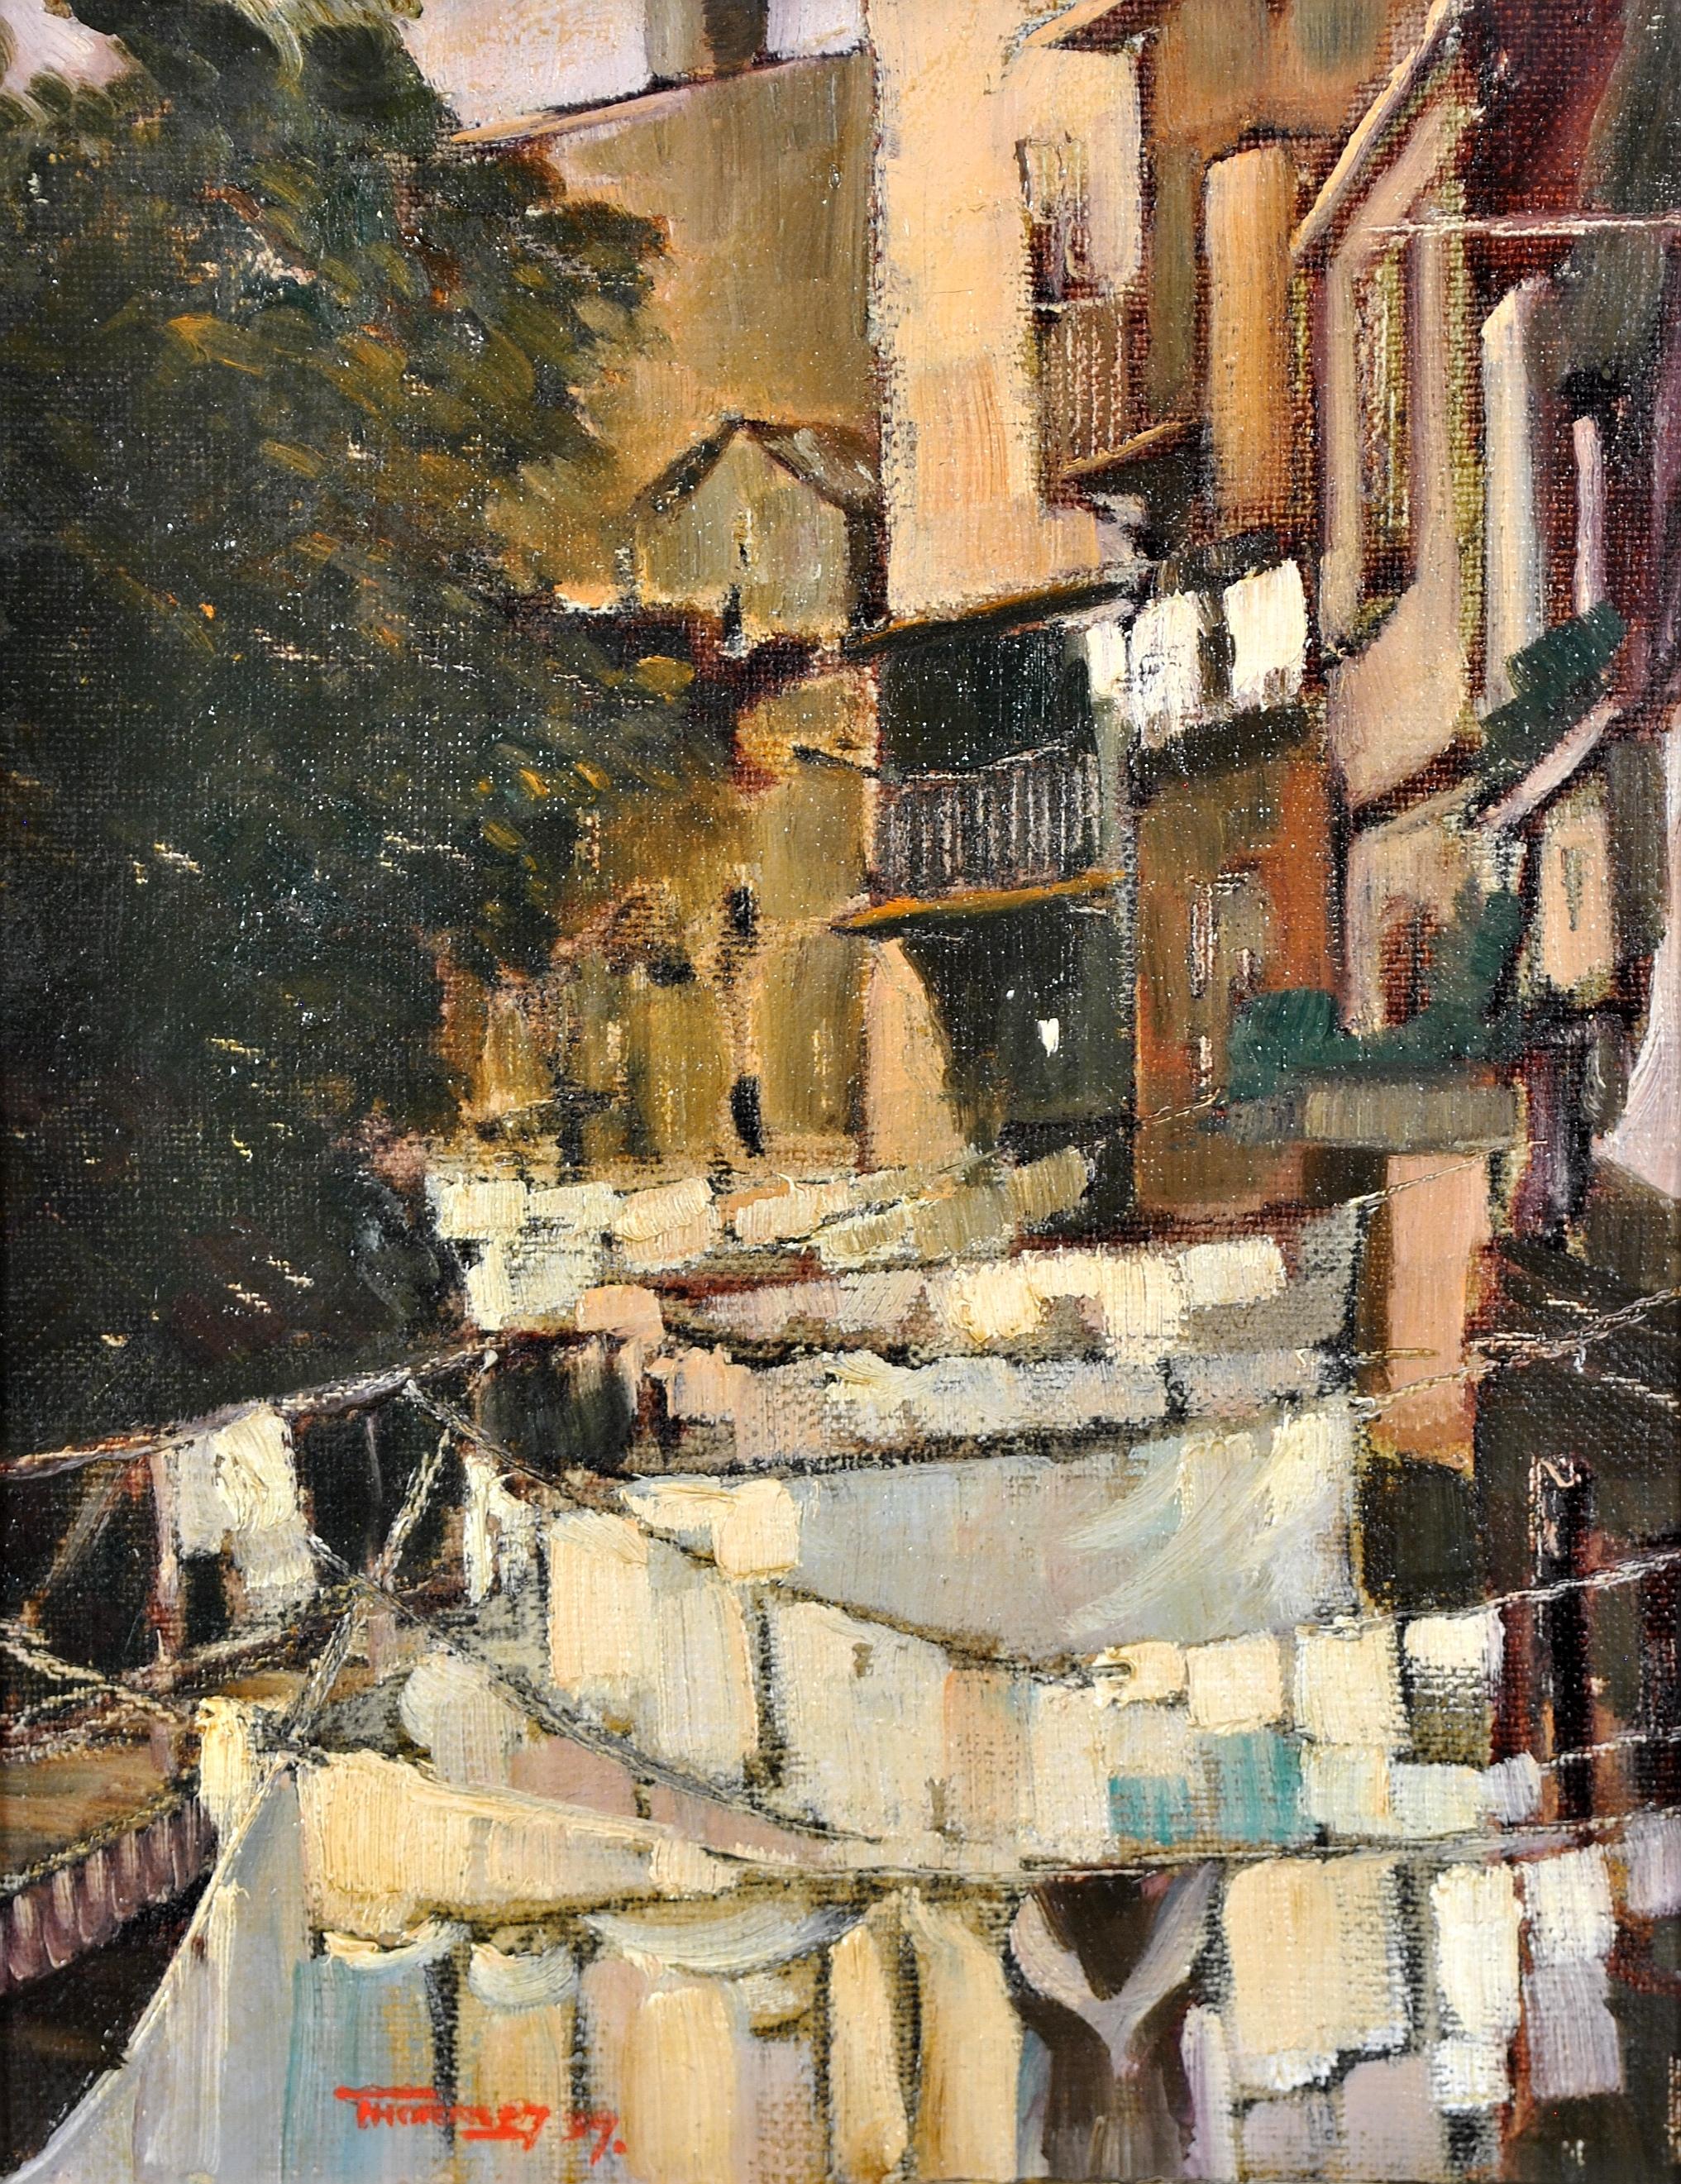 A very unusual early 20th century oil on canvas depicting washing on lines in the French Riviera town of Villefranche, as inscribed on the reverse.

The work is signed and dated 1937 lower right. Presented in a painted frame.

Artist: English